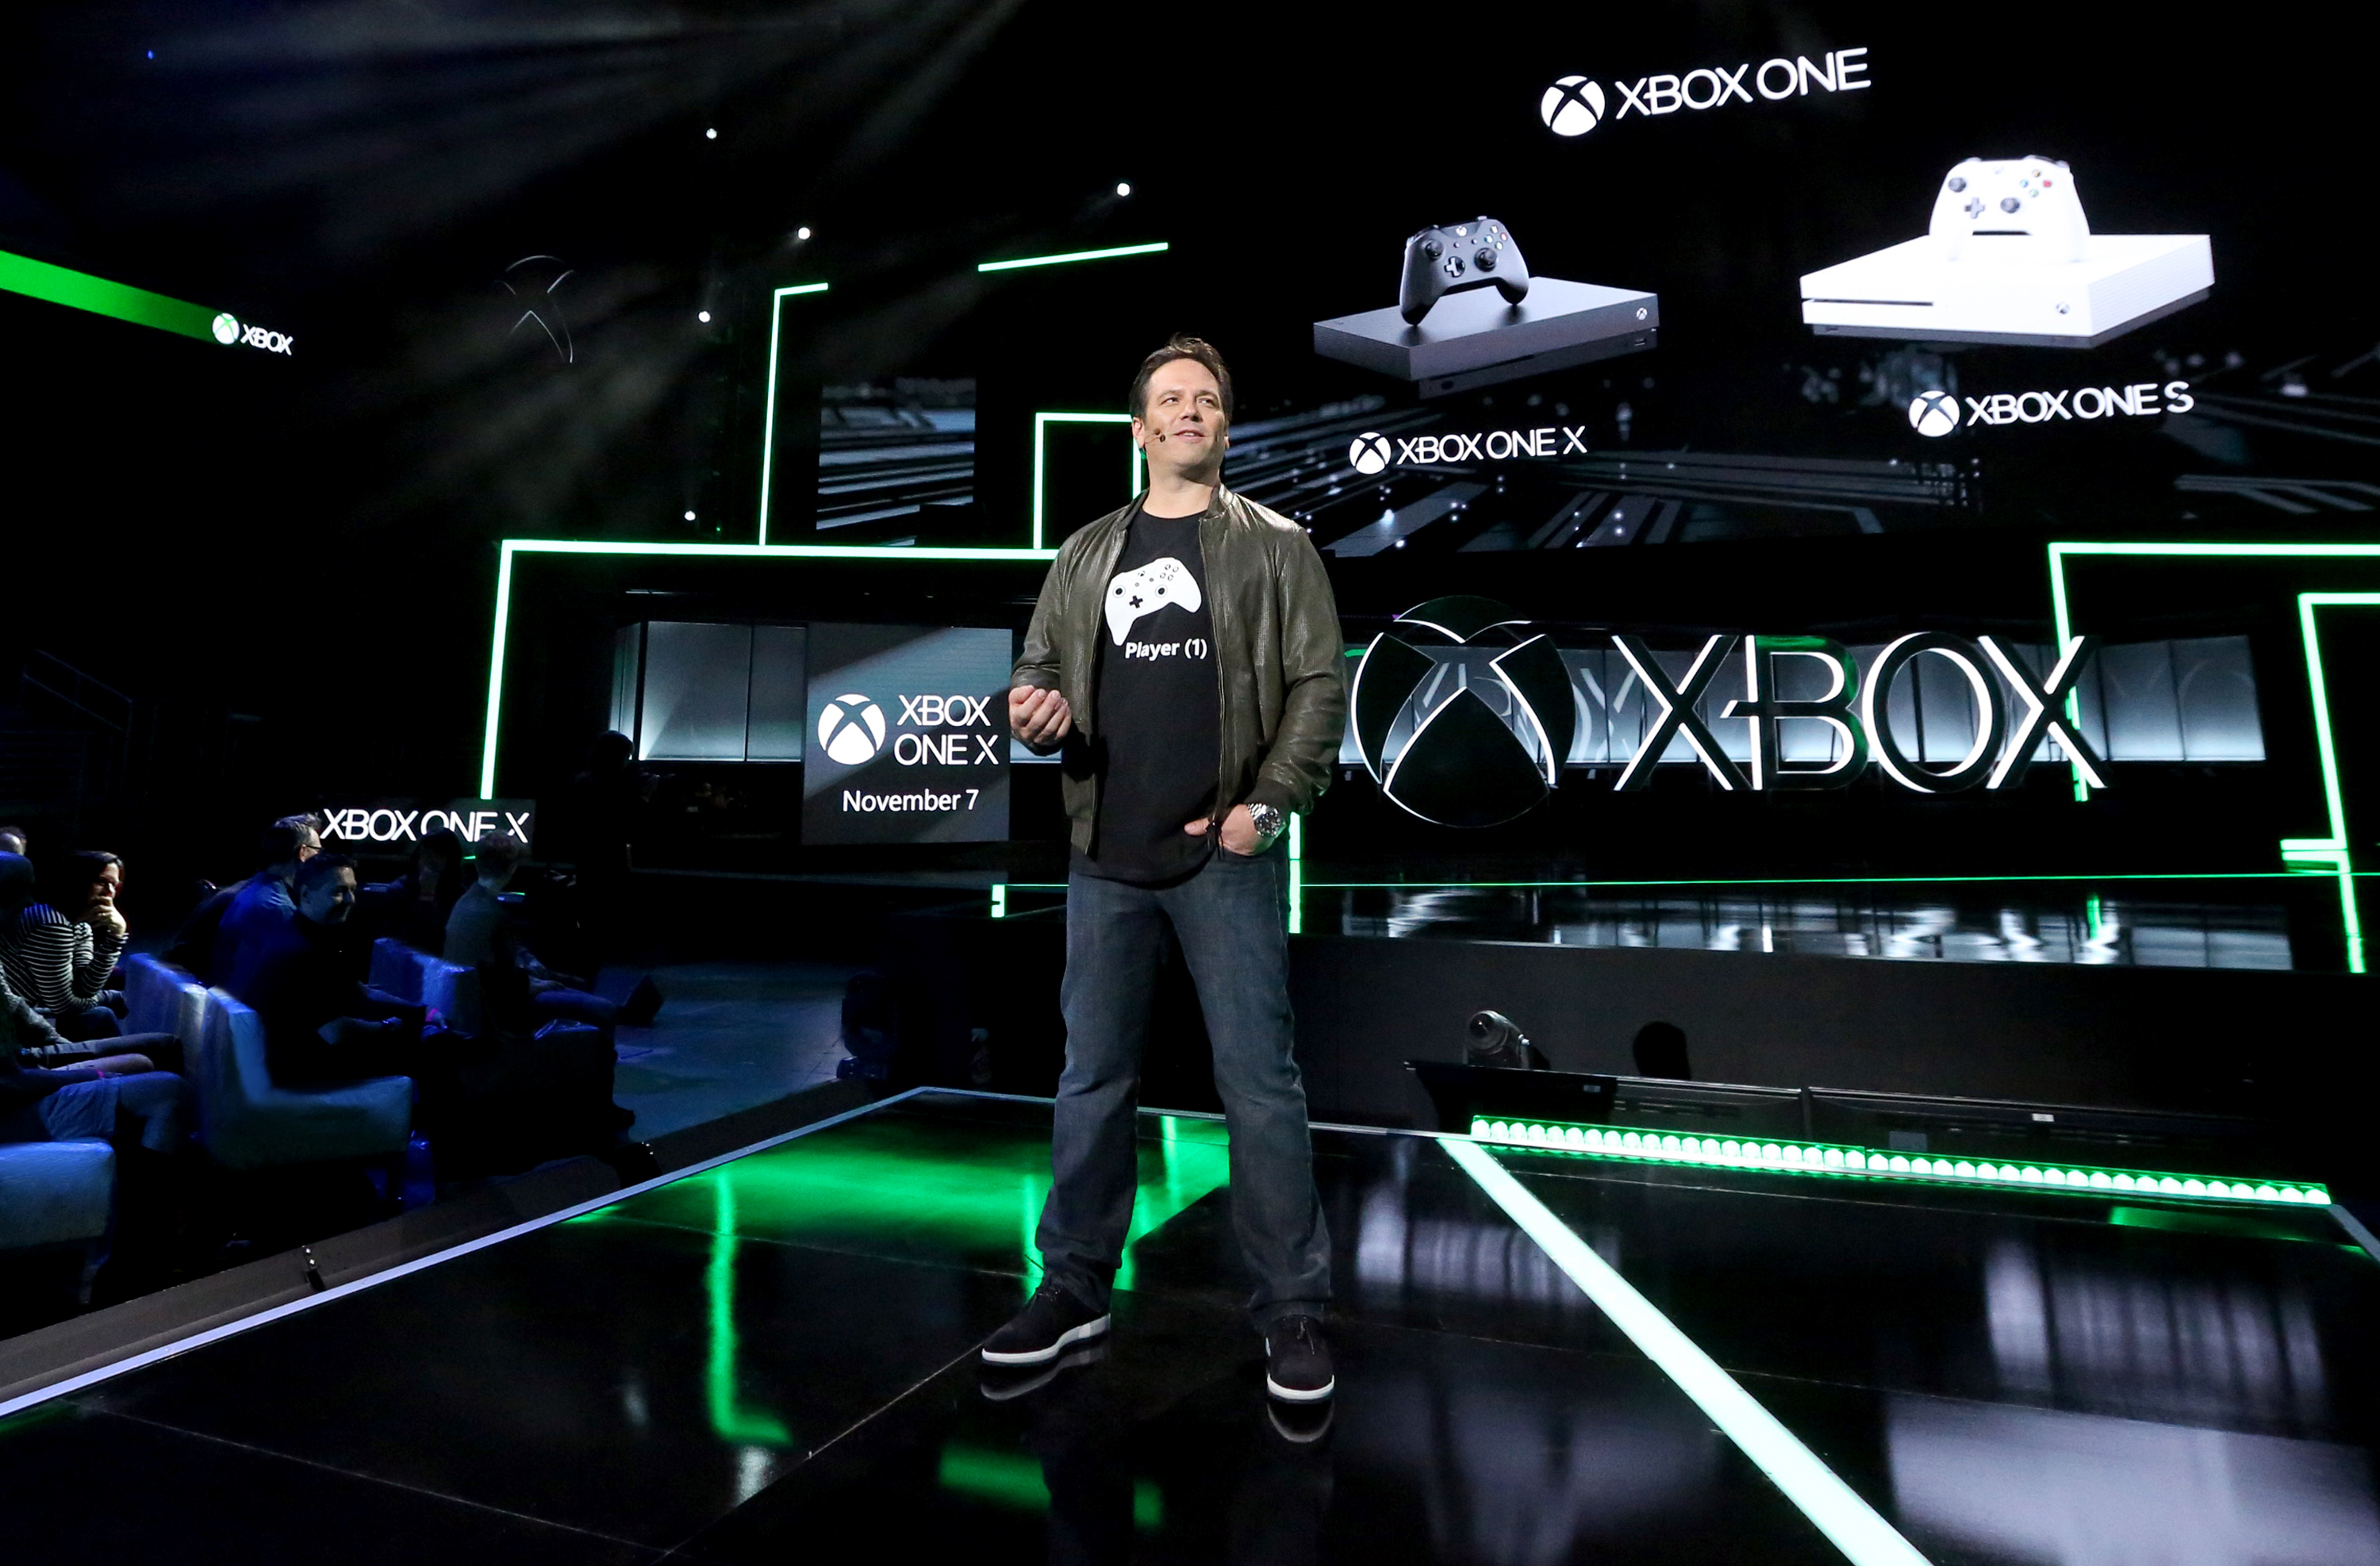 Phil Spencer, Head of Xbox, discusses the Xbox One family of devices, including Xbox One X, at the Xbox E3 2017 Briefing on Sunday, June 11, 2017 in Los Angeles.